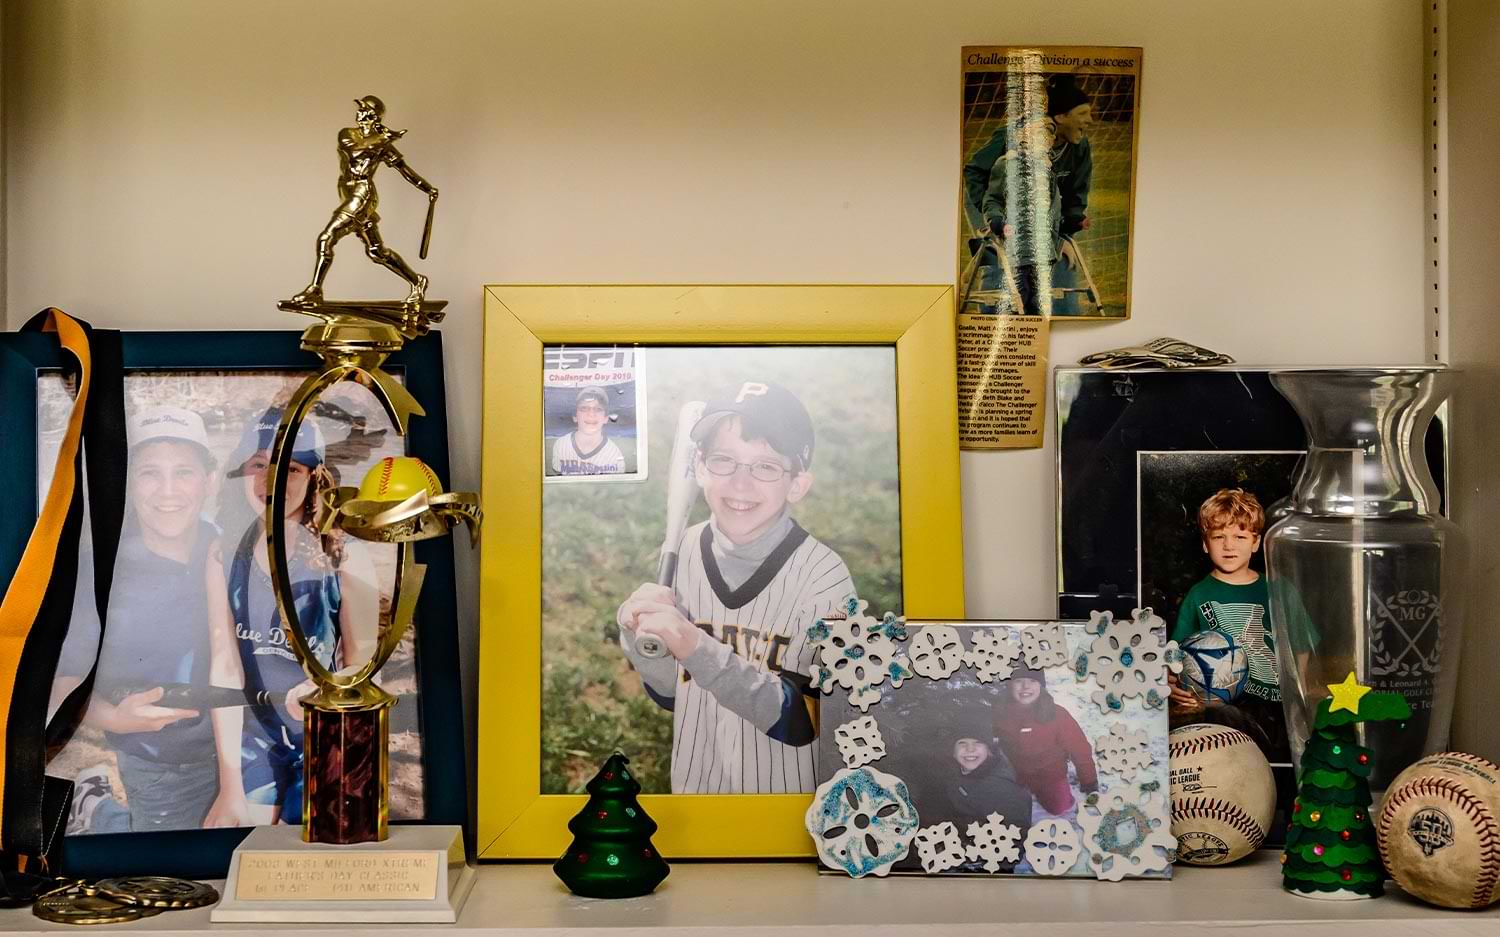 view of a shelf in the Agostini home featuring images of the Agostini children participating in sports and activities